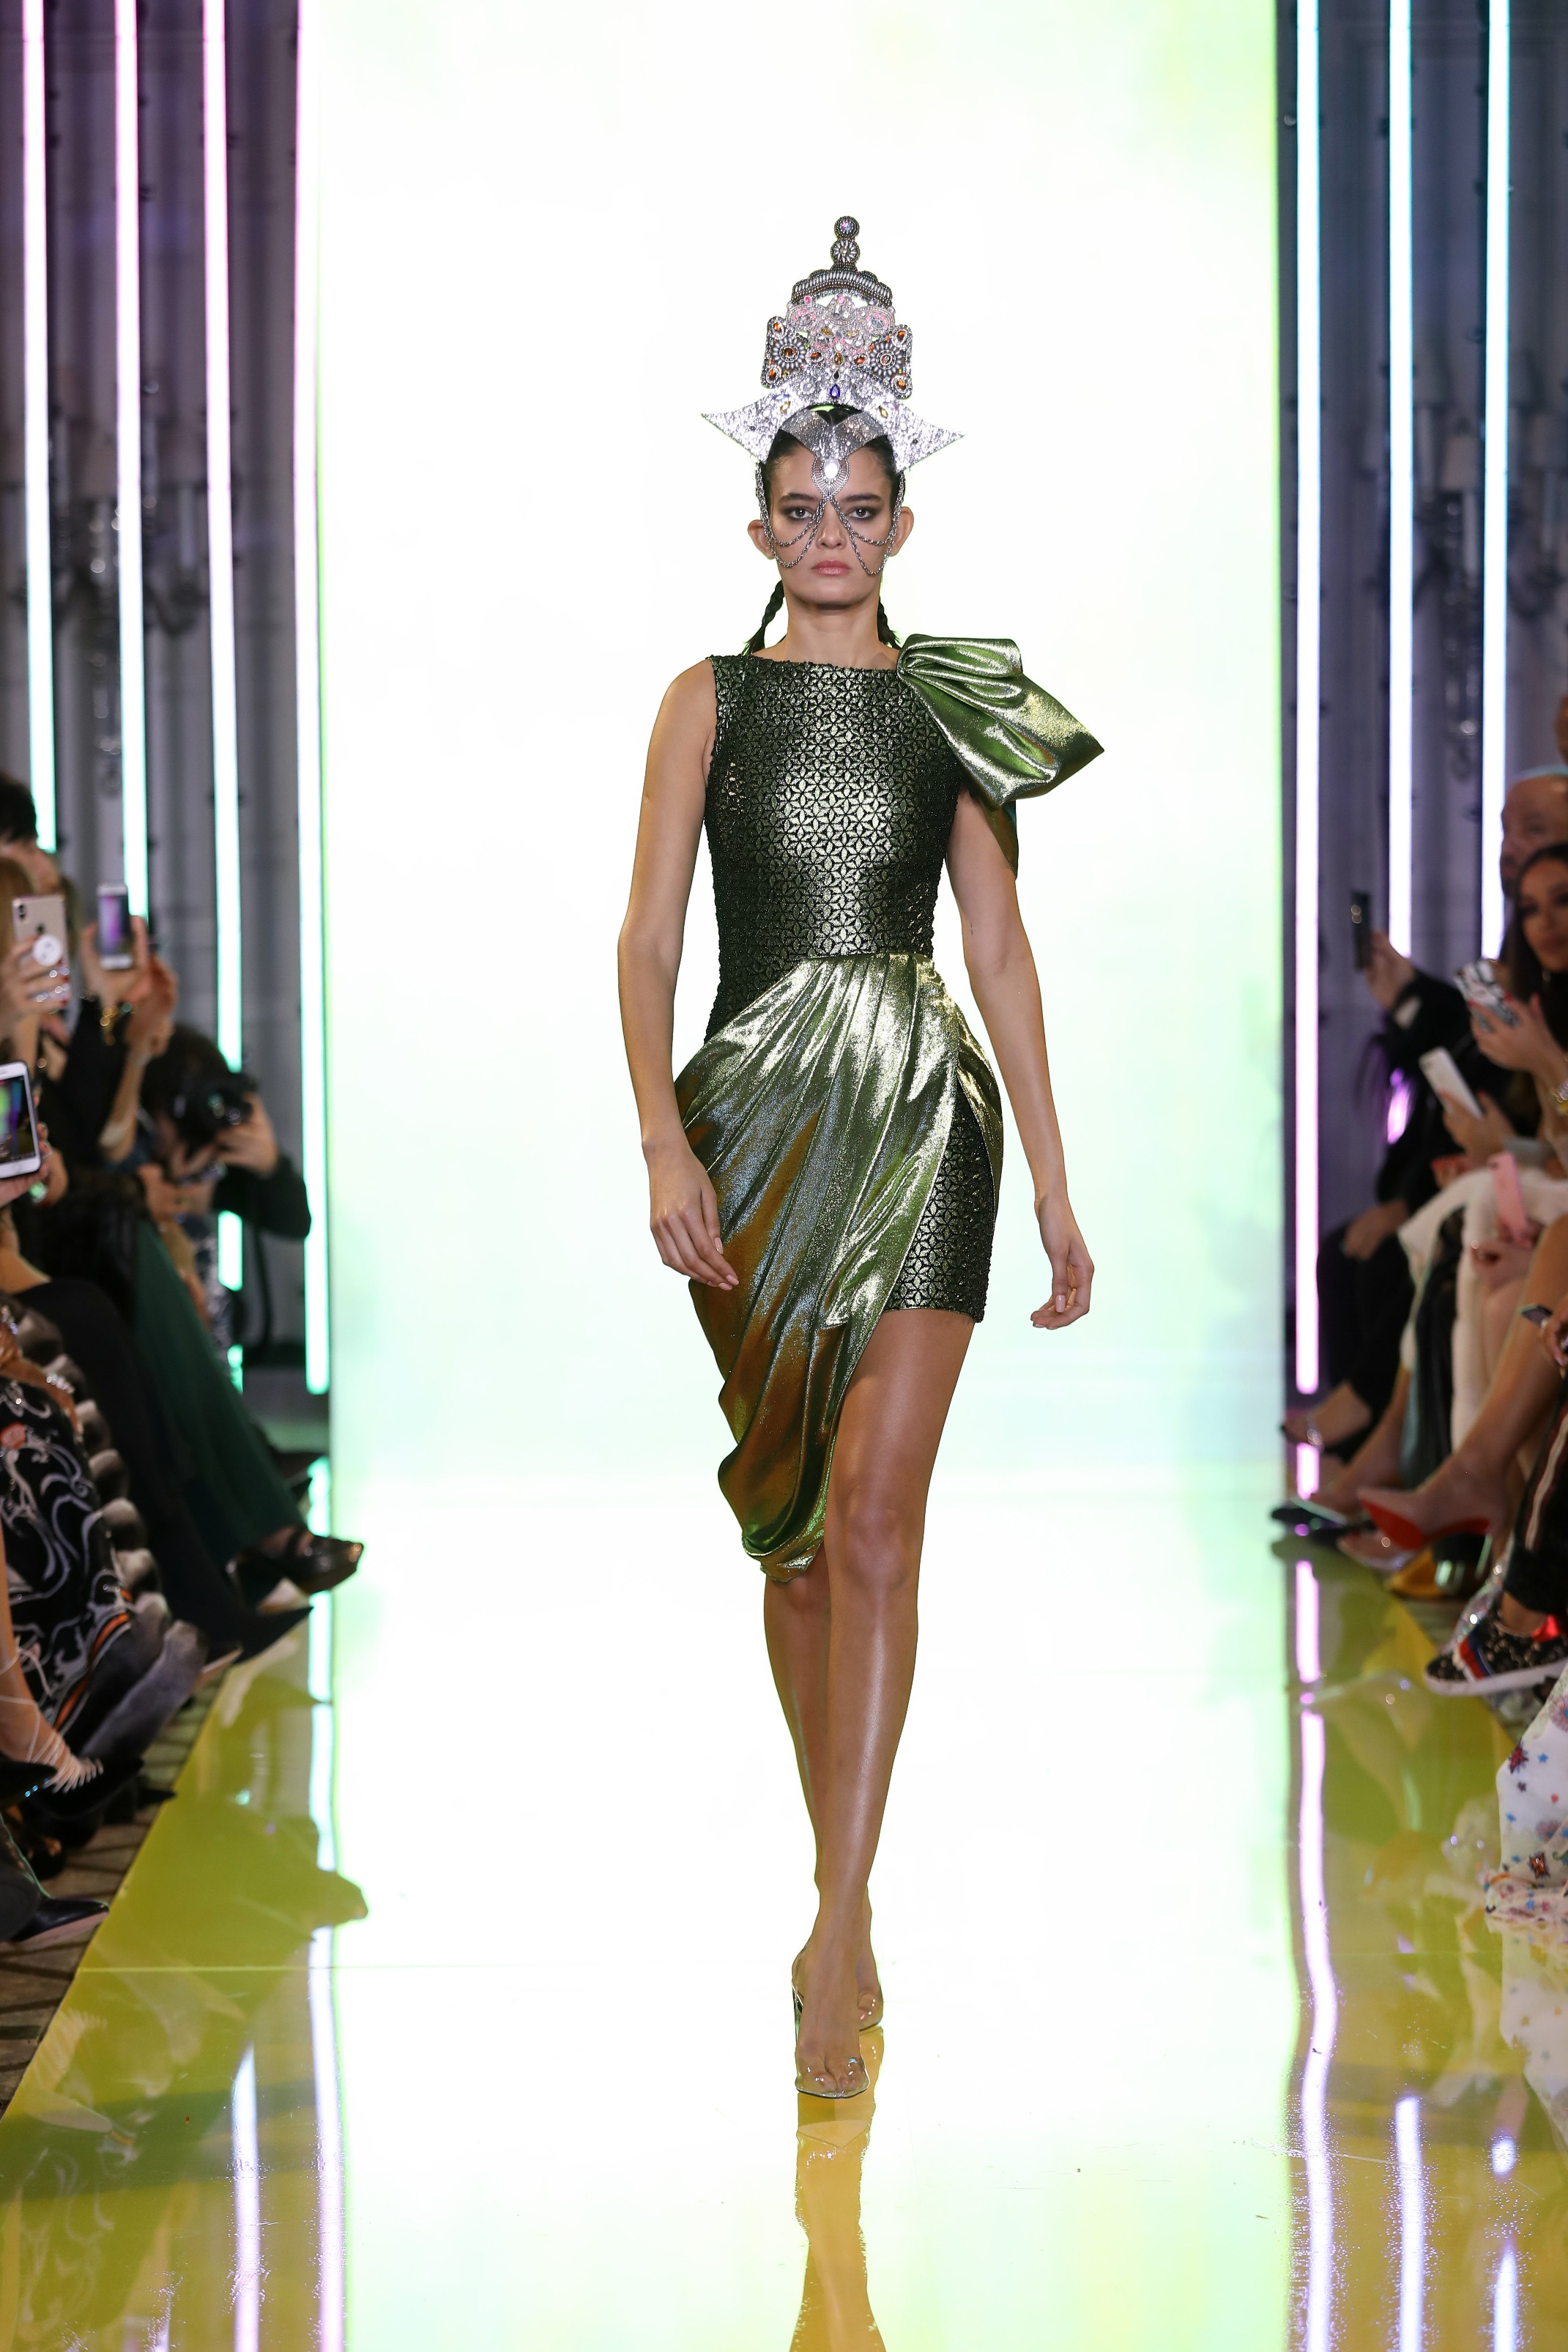 SS19-29- Olive Green Asymmetric Gown Featuring A Tulip Skirt And Boat Neck Top Embellished With Black Beads .jpg